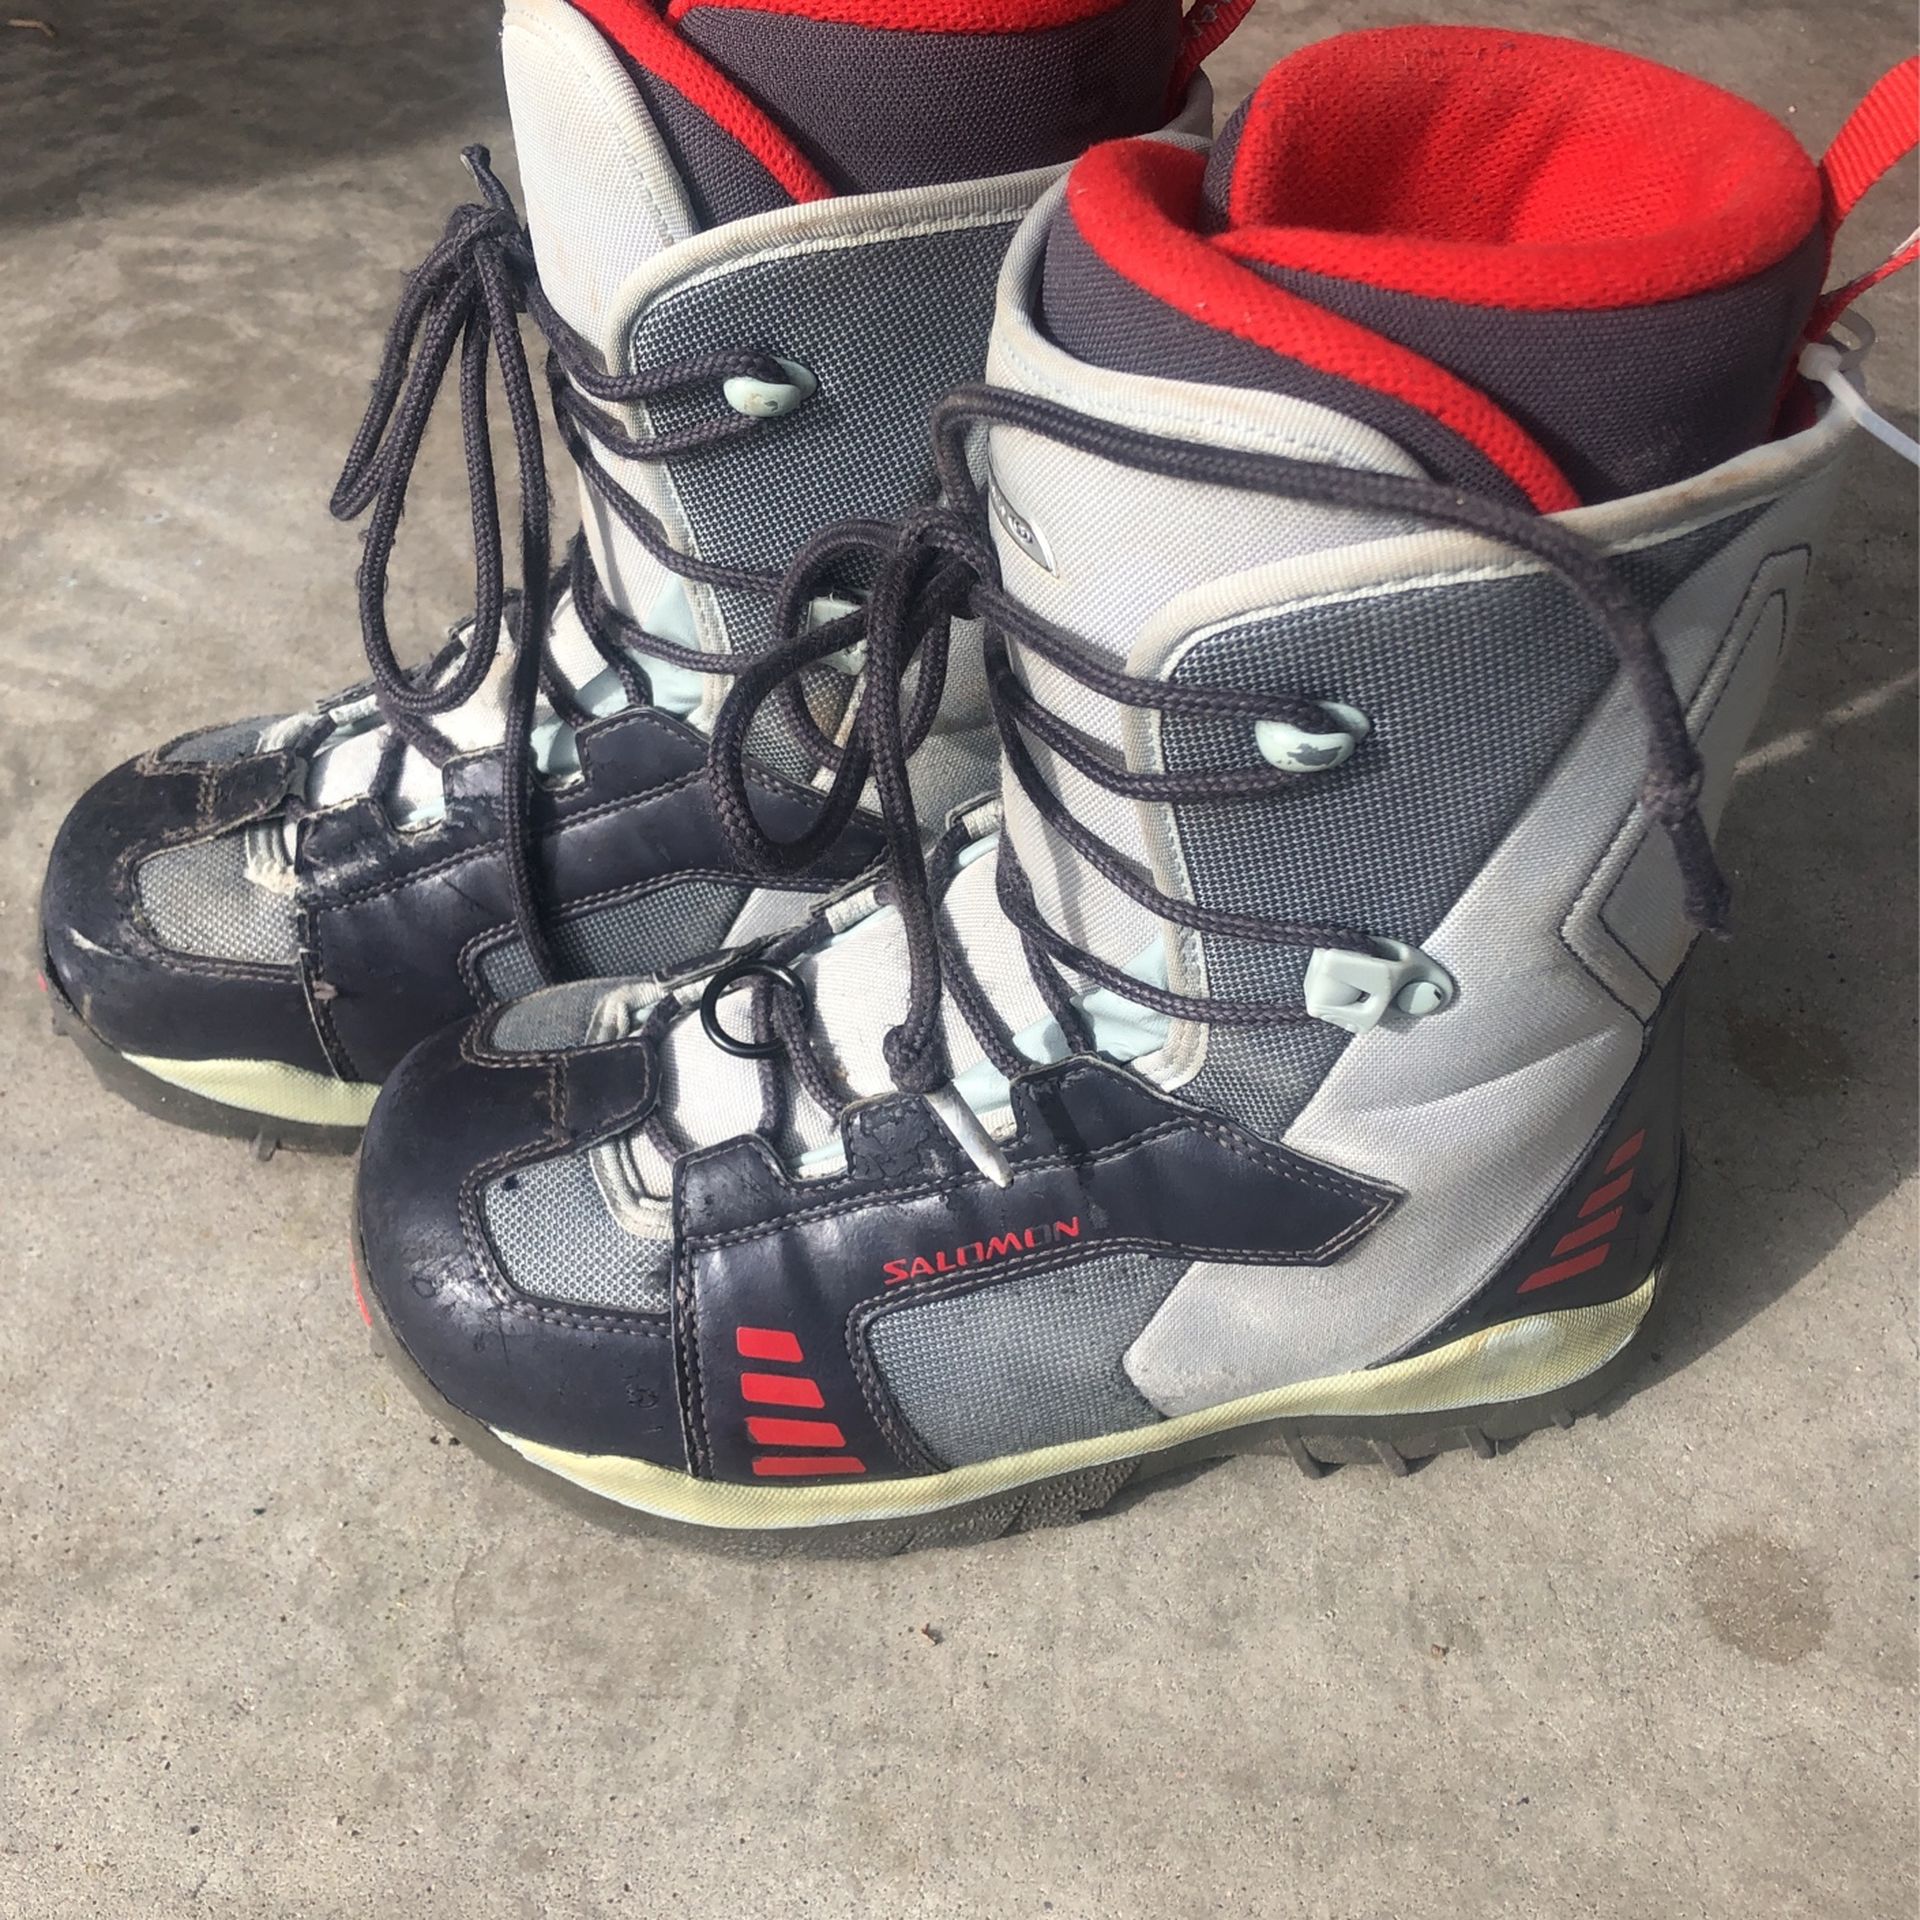 Snowboard Boots Size 5.5